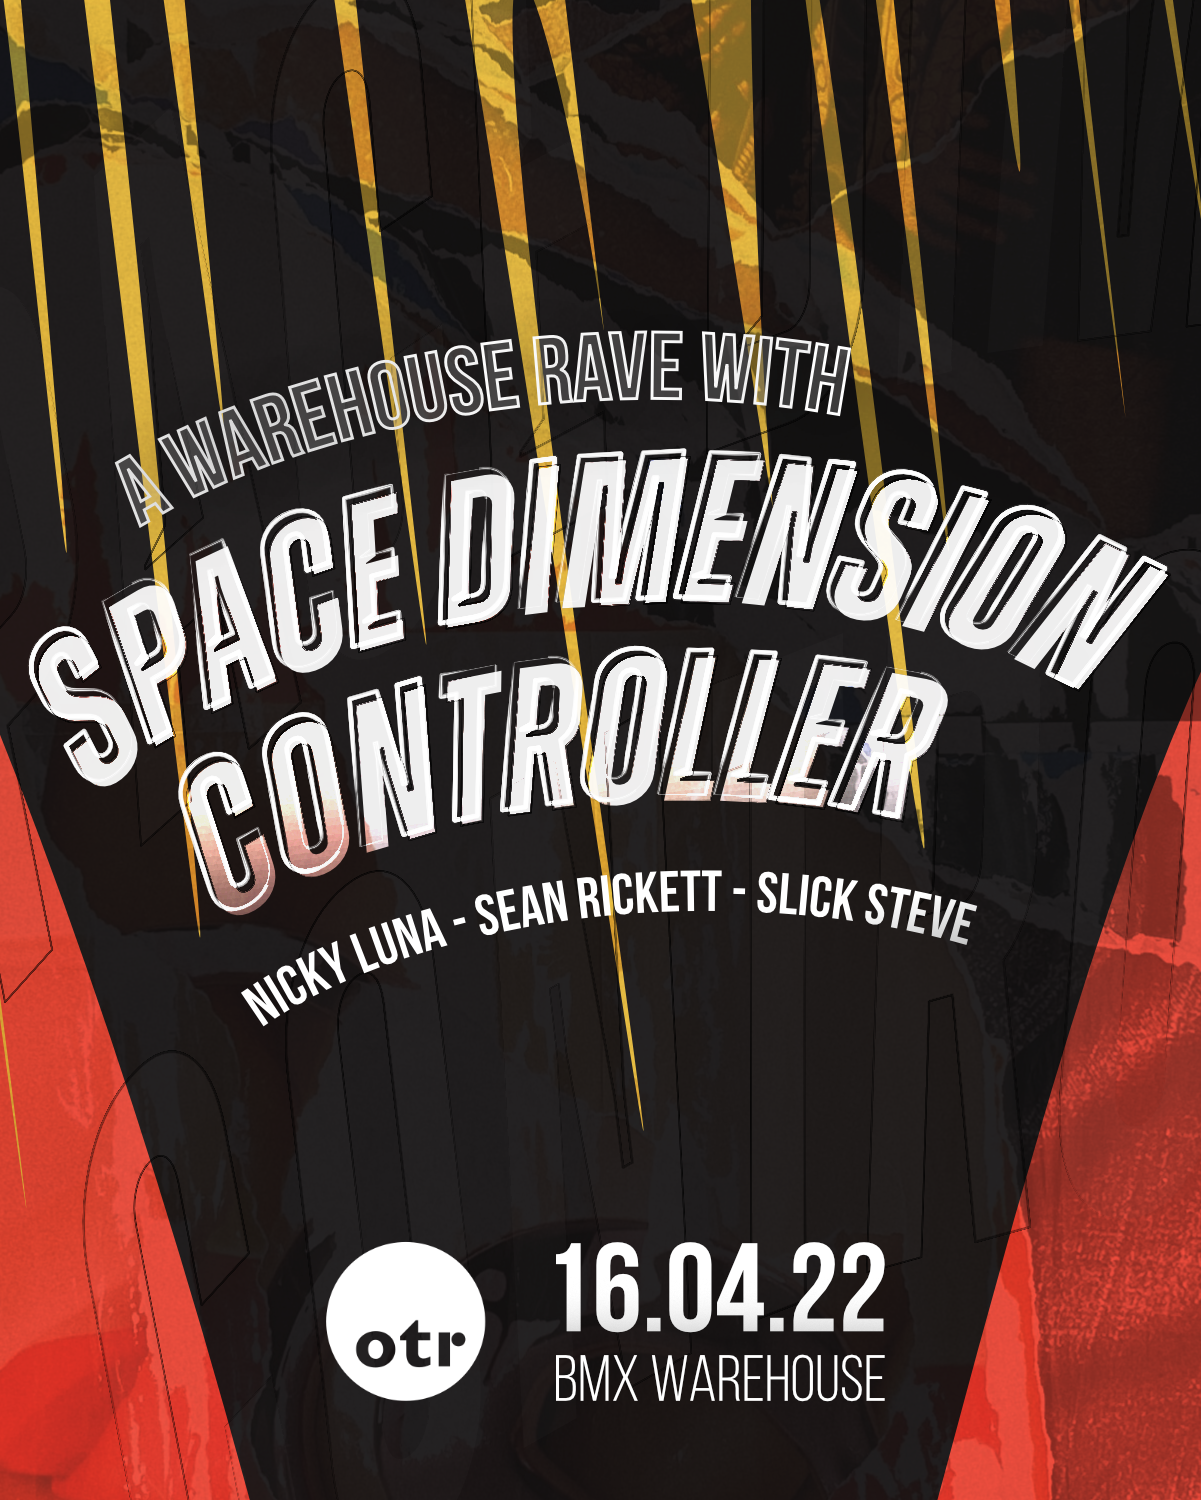 OTR A Warehouse Rave w/ Space Dimension Controller poster